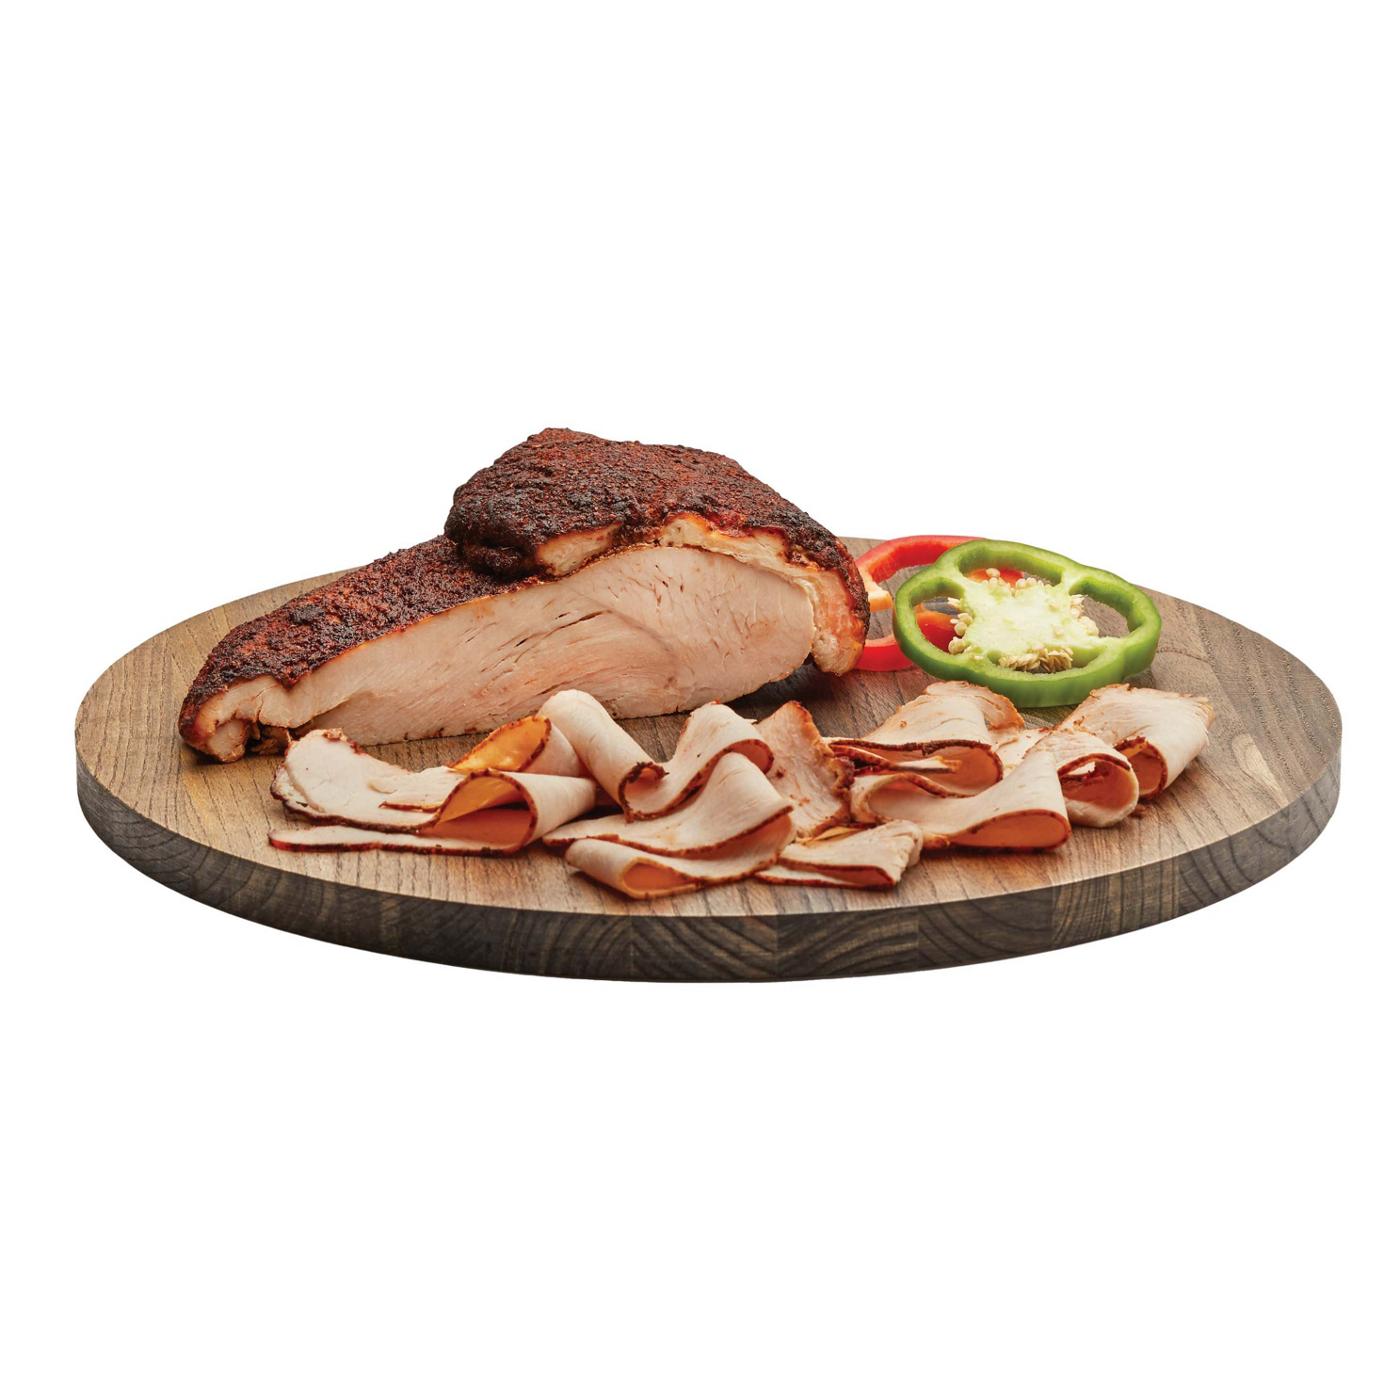 H-E-B Natural Sliced In-House Roasted Cajun Turkey Breast; image 1 of 2